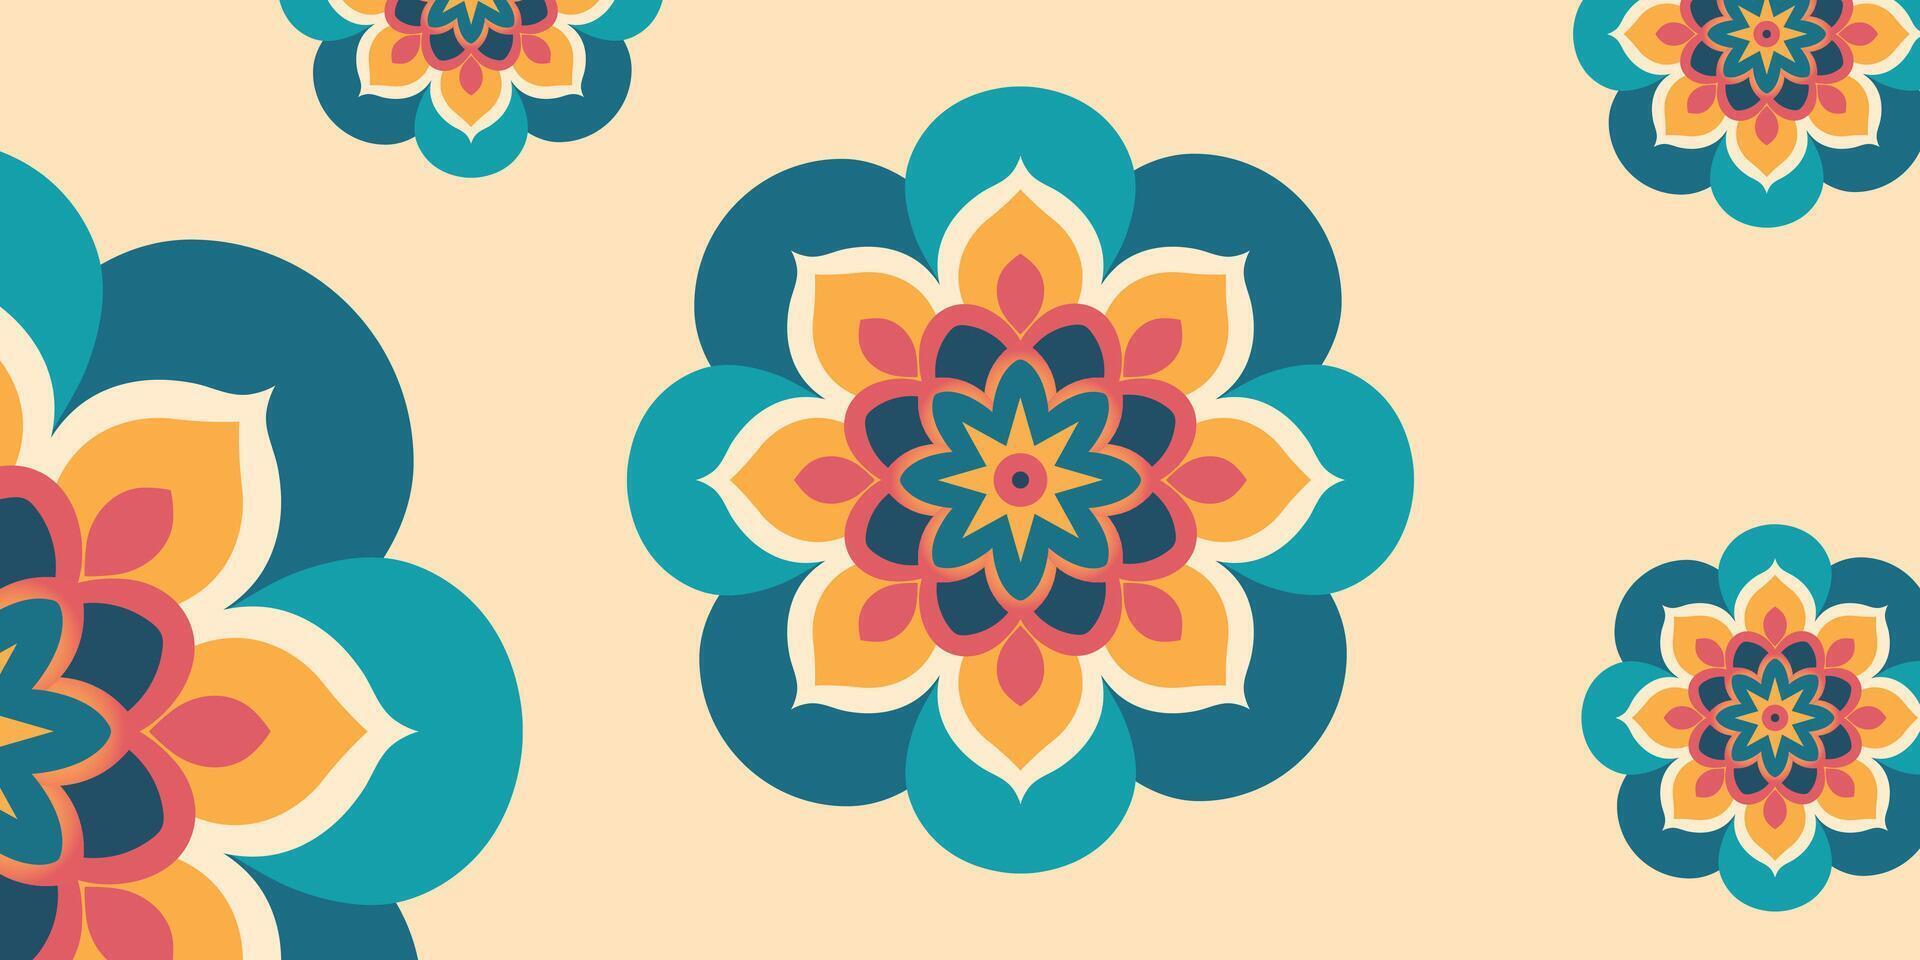 Modern floral mandala background with colorful style vector